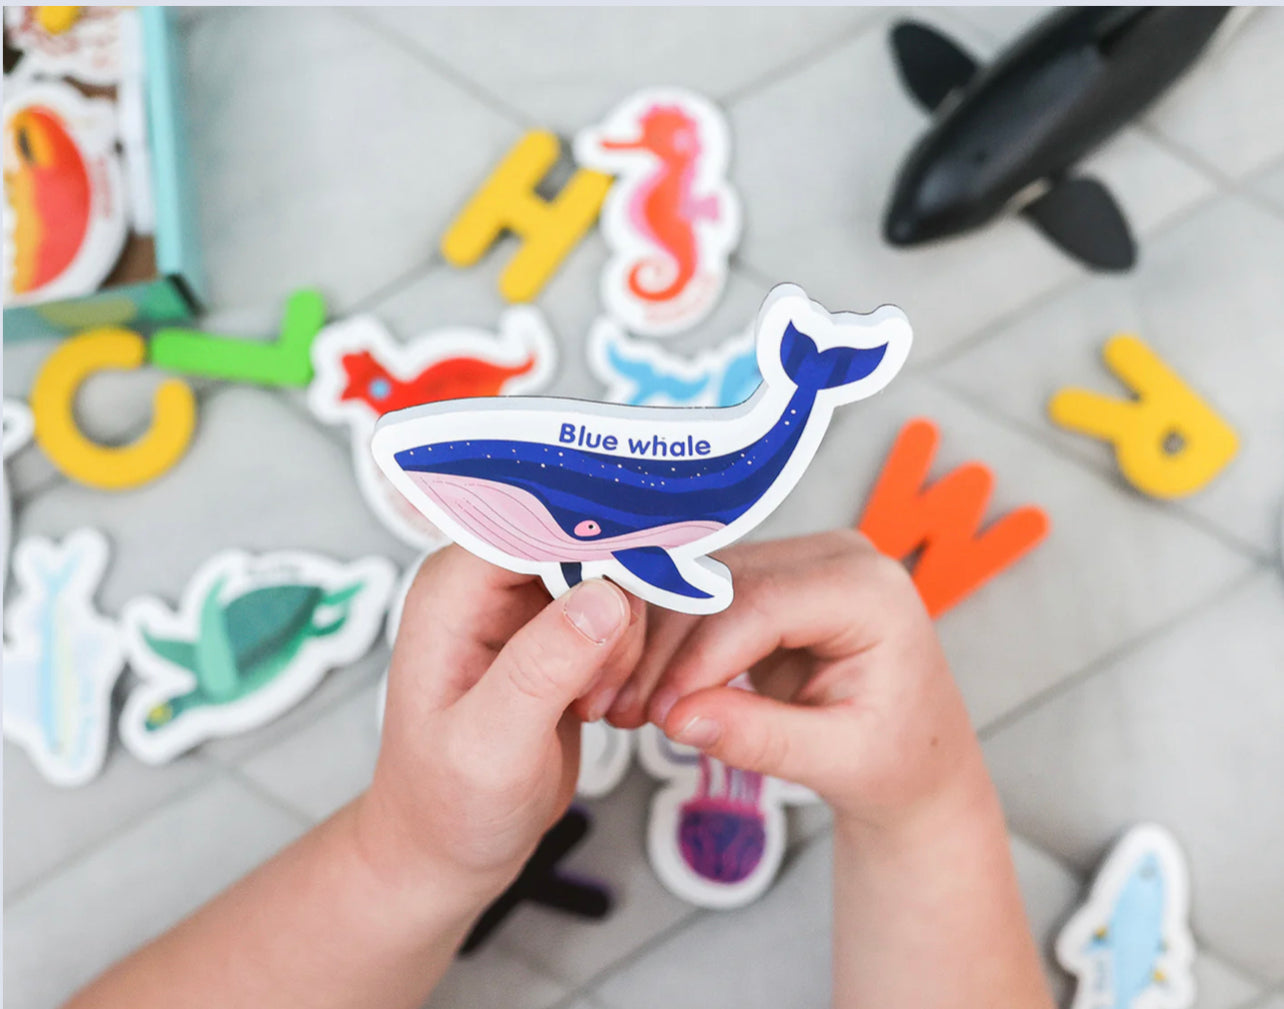 Curious Columbus - Magnetic Sea Creatures and Letters